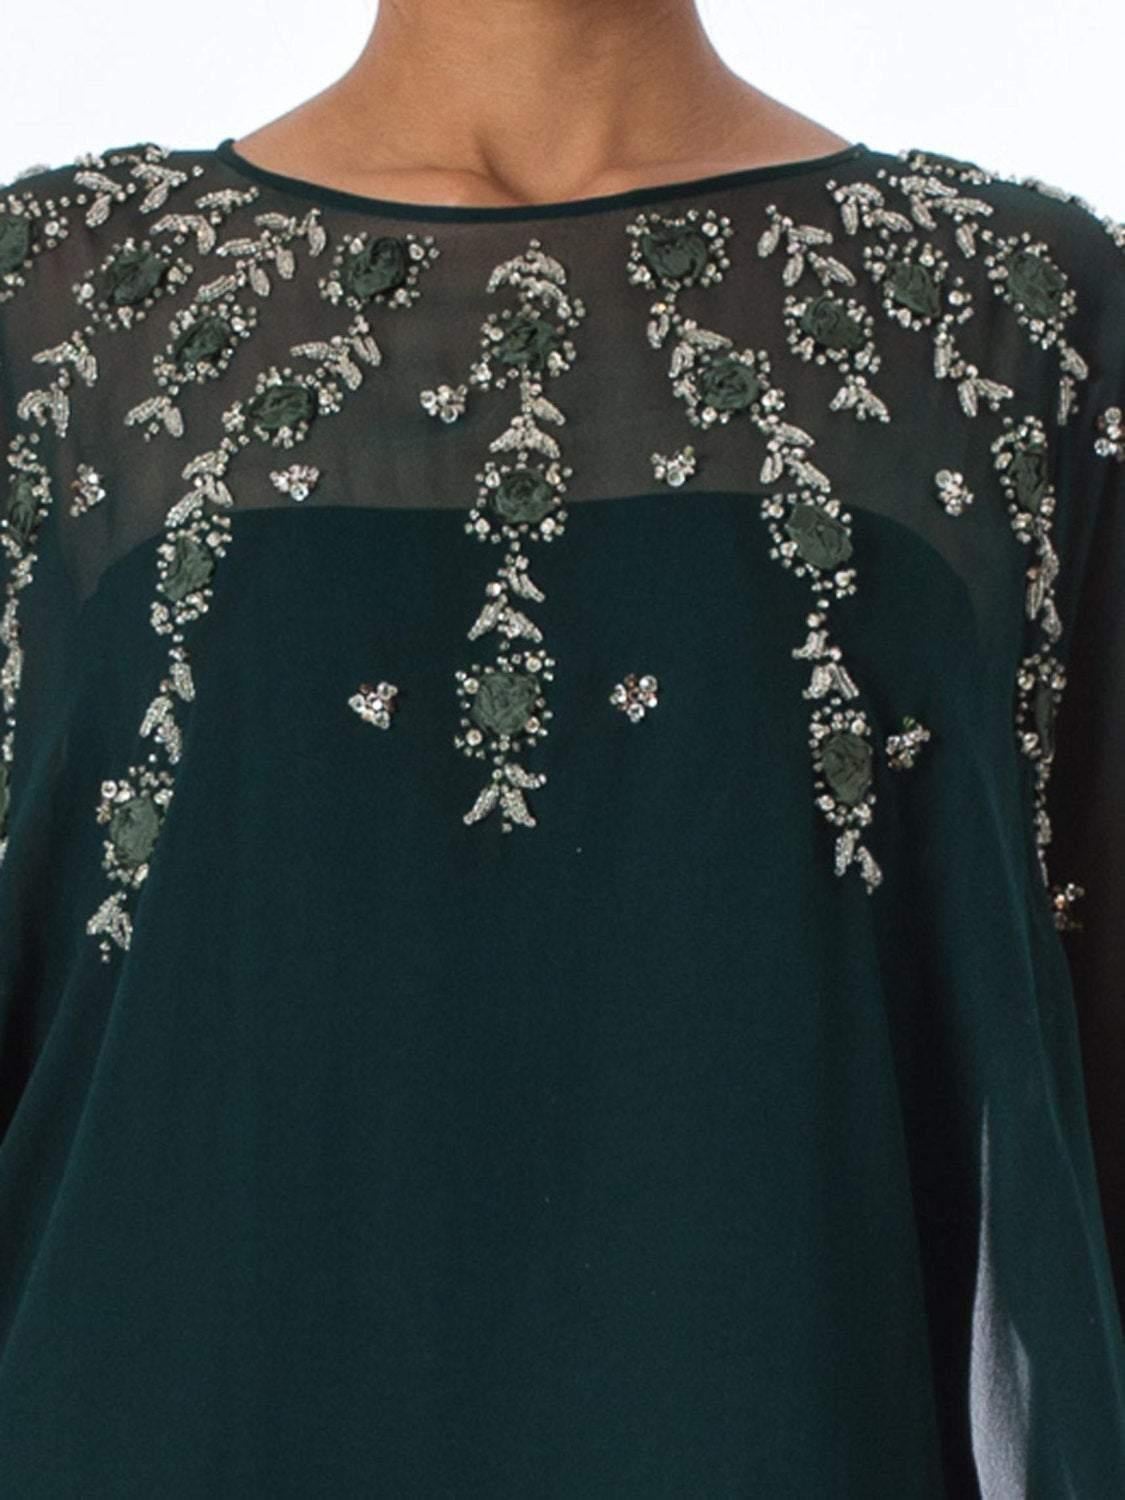 1970S Dark Green Silk Chiffon Cocktail Dress Beaded and Embellished ...